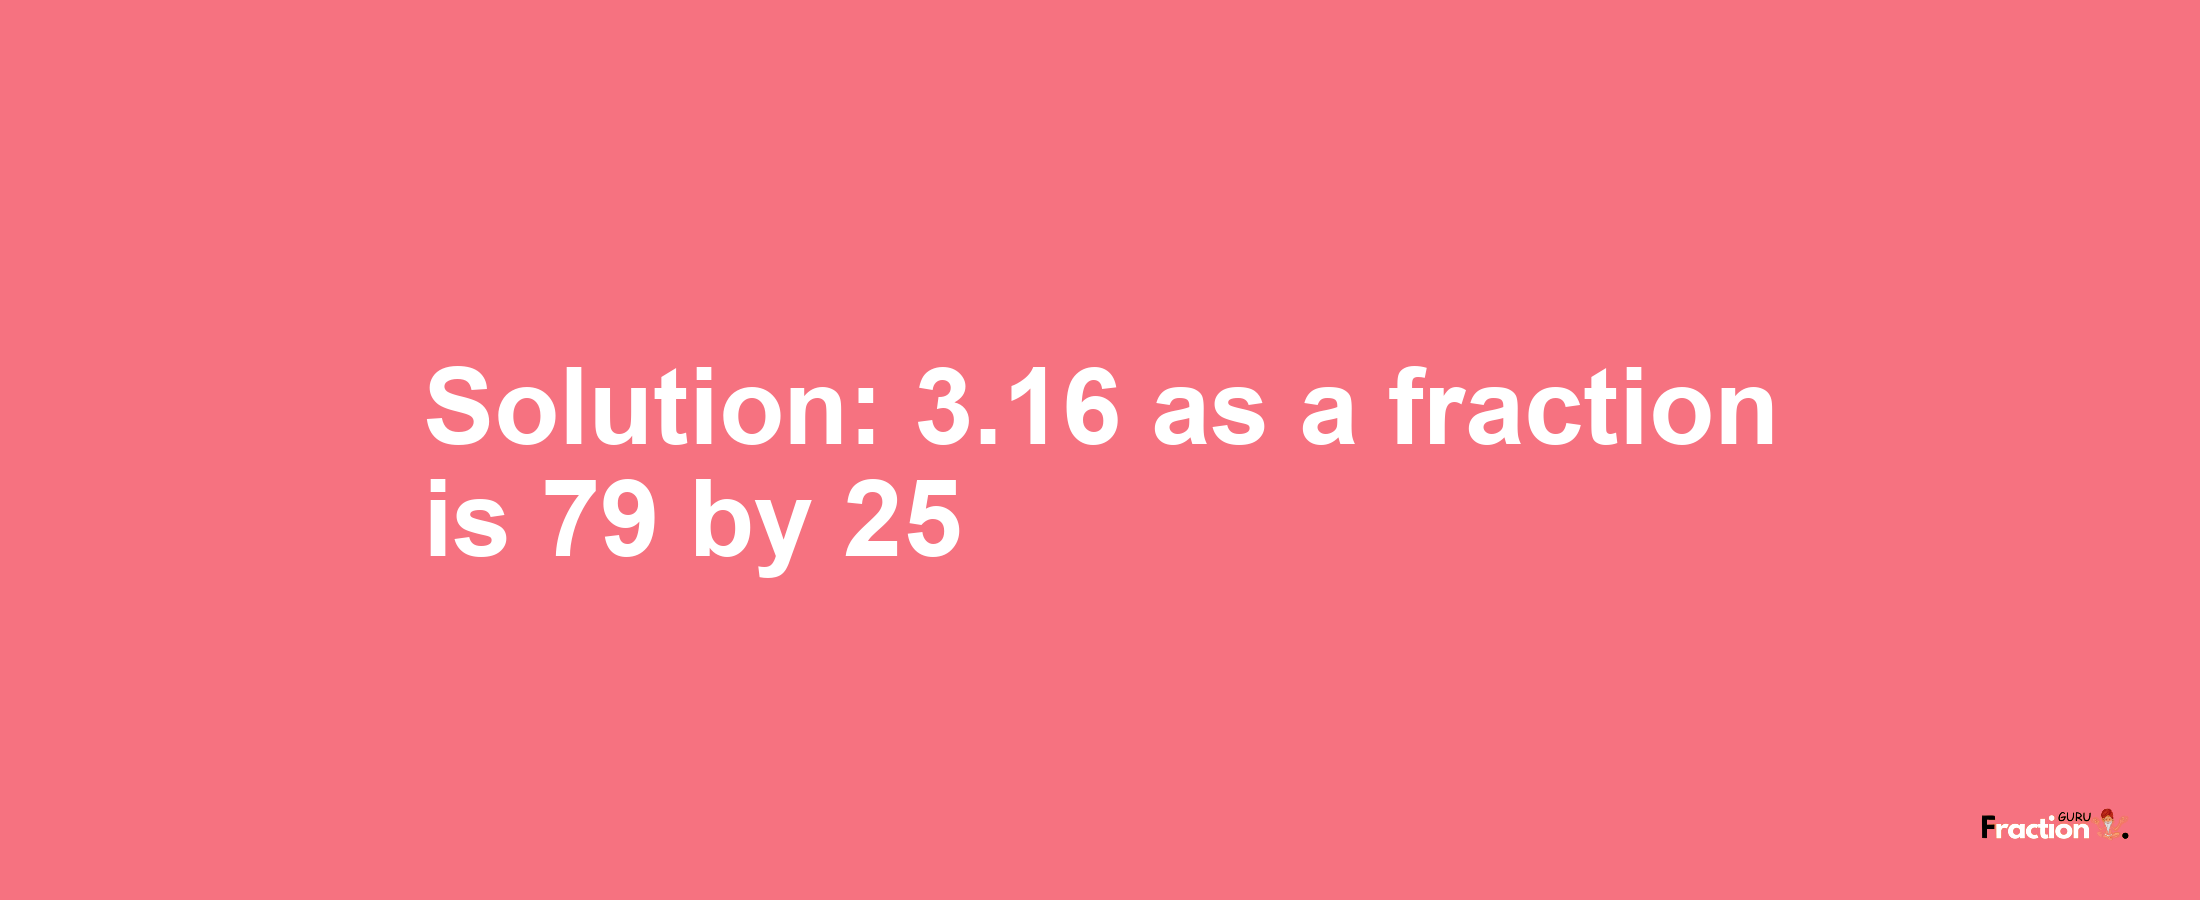 Solution:3.16 as a fraction is 79/25